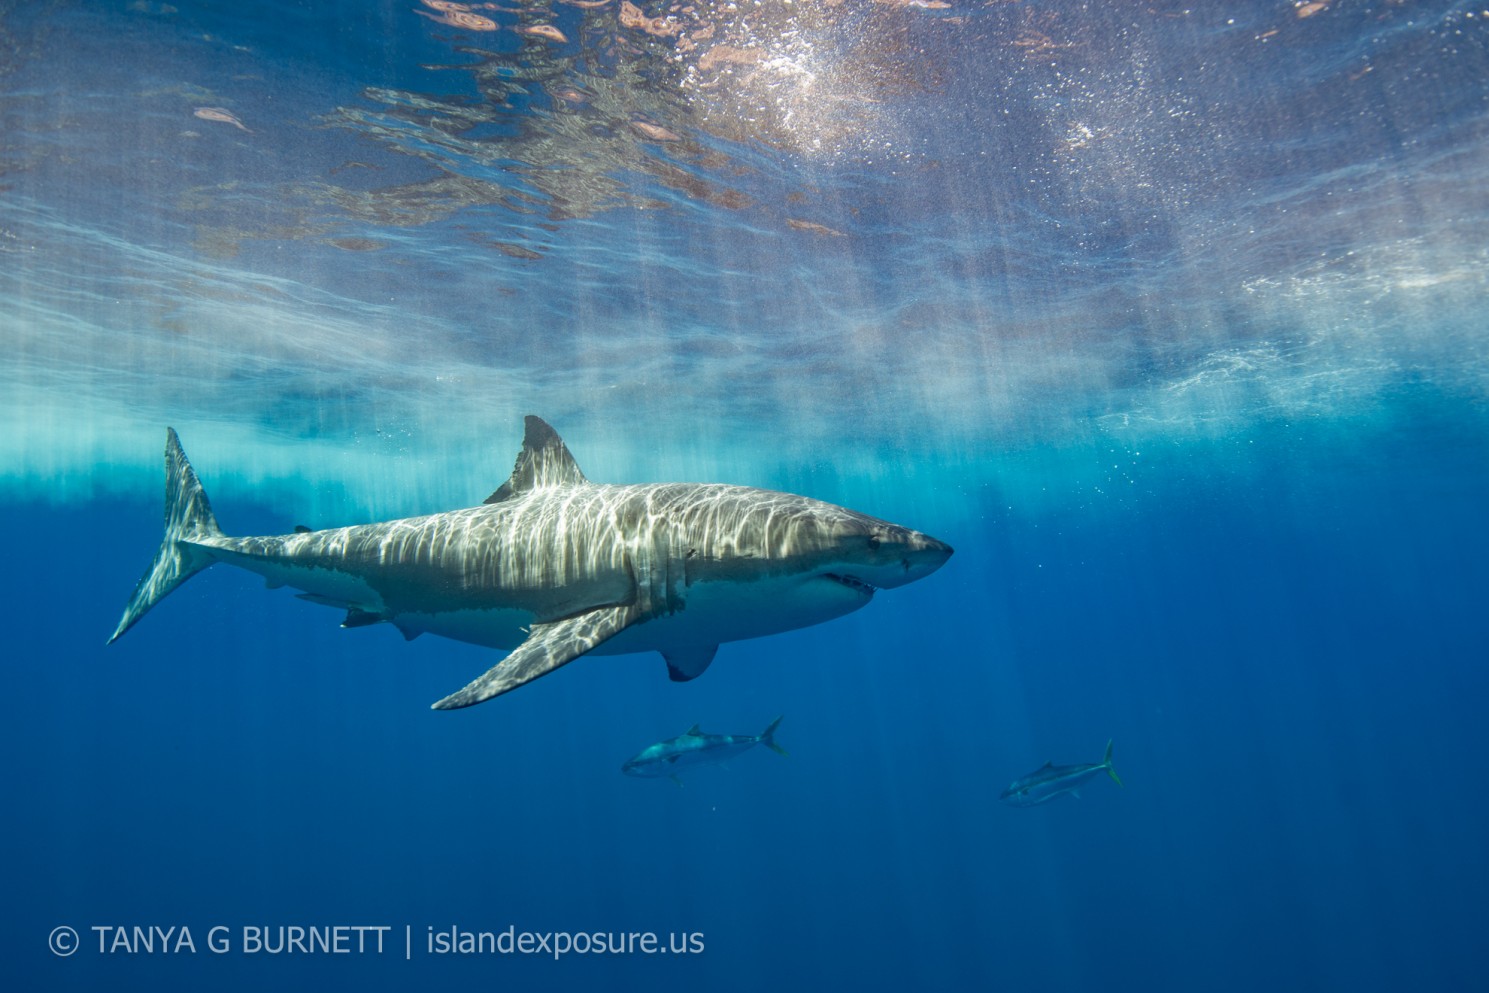 great white shark amidst the sparkling blue water